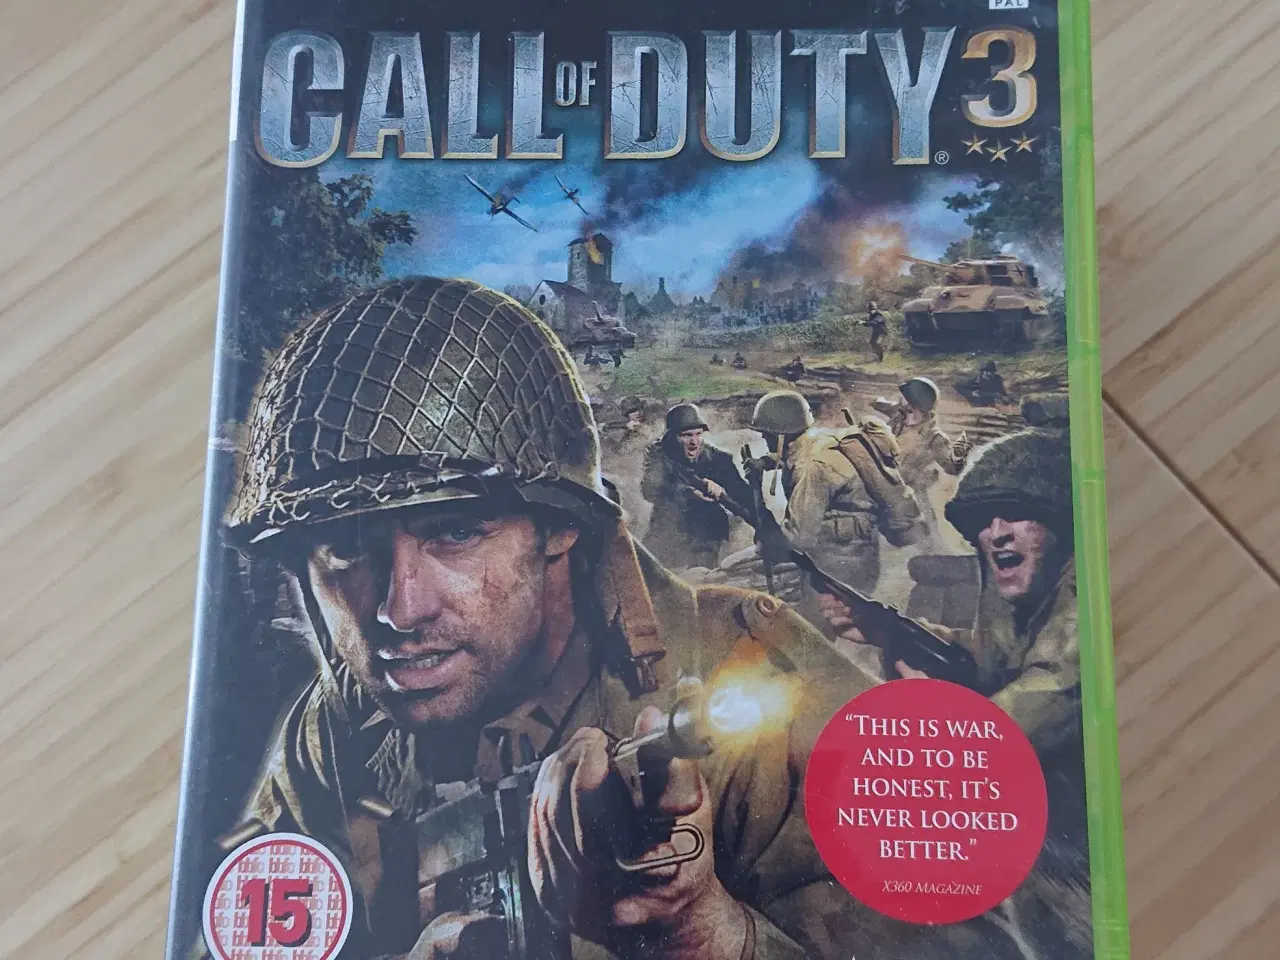 Billede 1 - xbox 360 spil Call of Duty 3